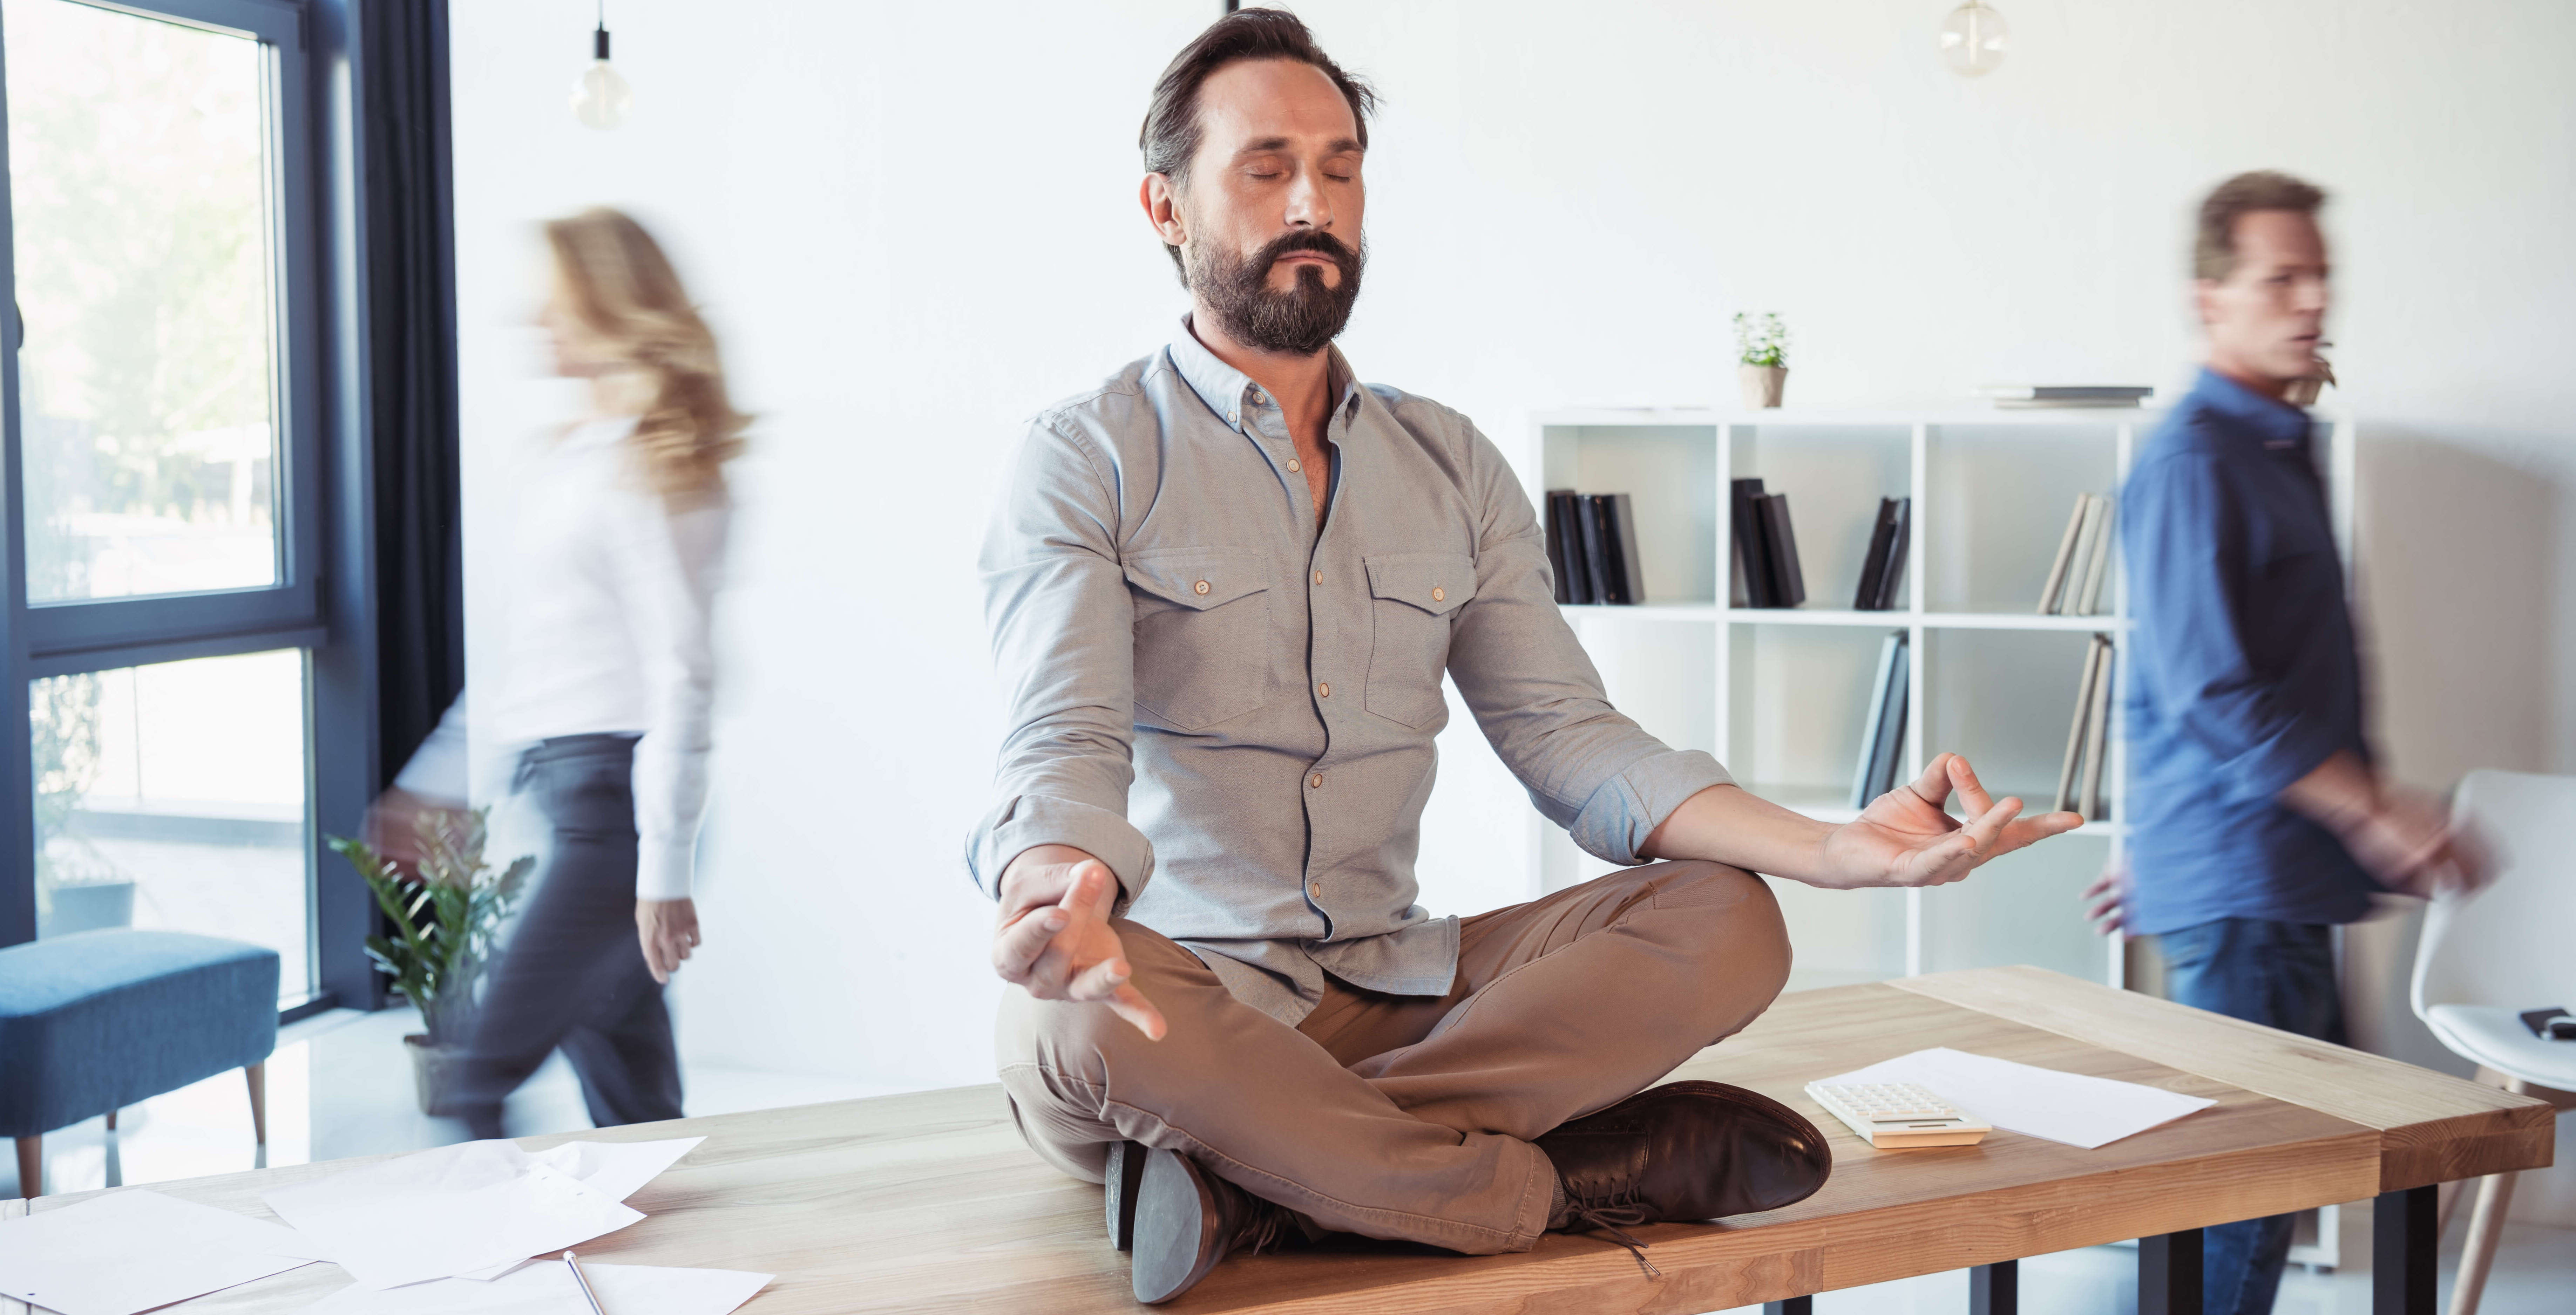 Businessman meditating in lotus position while colleagues move around in coworking office